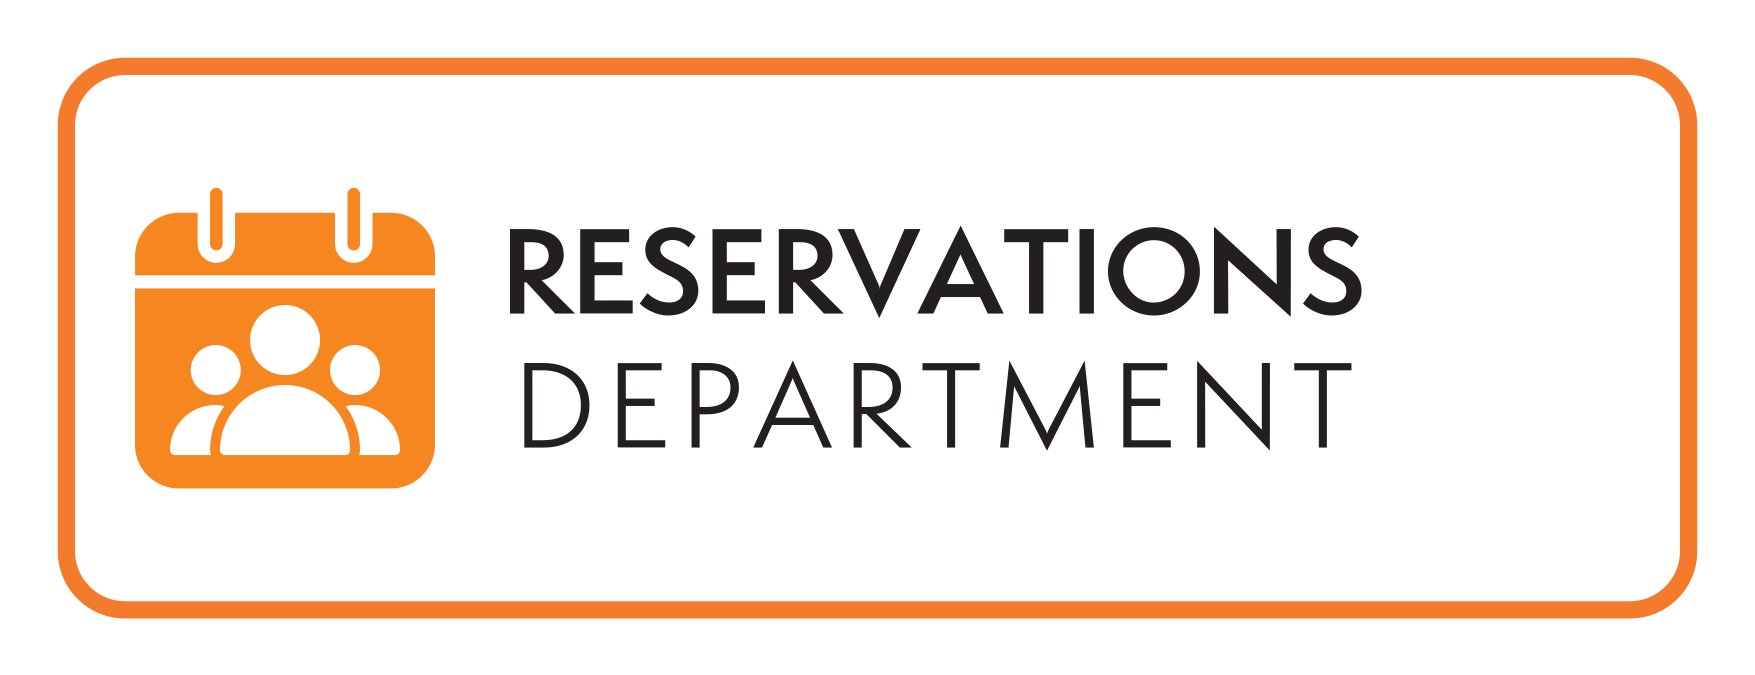 Reservations Department